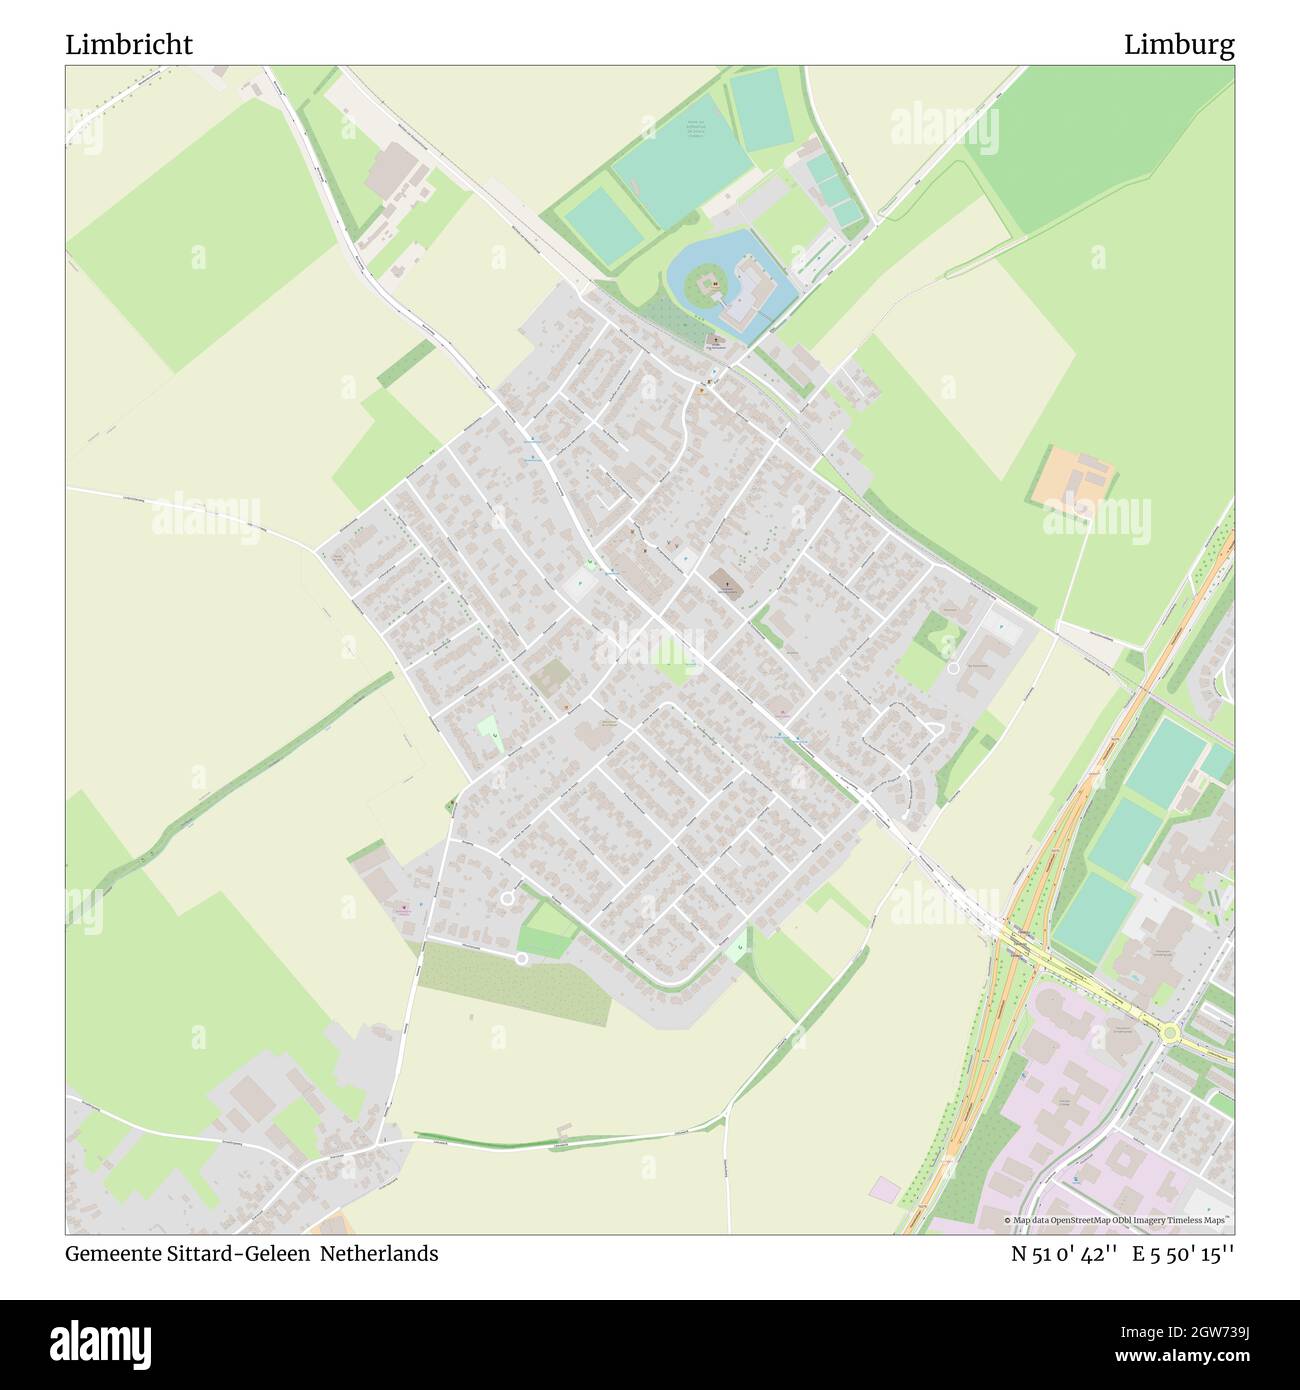 Limbricht, Gemeente Sittard-Geleen, Netherlands, Limburg, N 51 0' 42'', E 5 50' 15'', map, Timeless Map published in 2021. Travelers, explorers and adventurers like Florence Nightingale, David Livingstone, Ernest Shackleton, Lewis and Clark and Sherlock Holmes relied on maps to plan travels to the world's most remote corners, Timeless Maps is mapping most locations on the globe, showing the achievement of great dreams Stock Photo